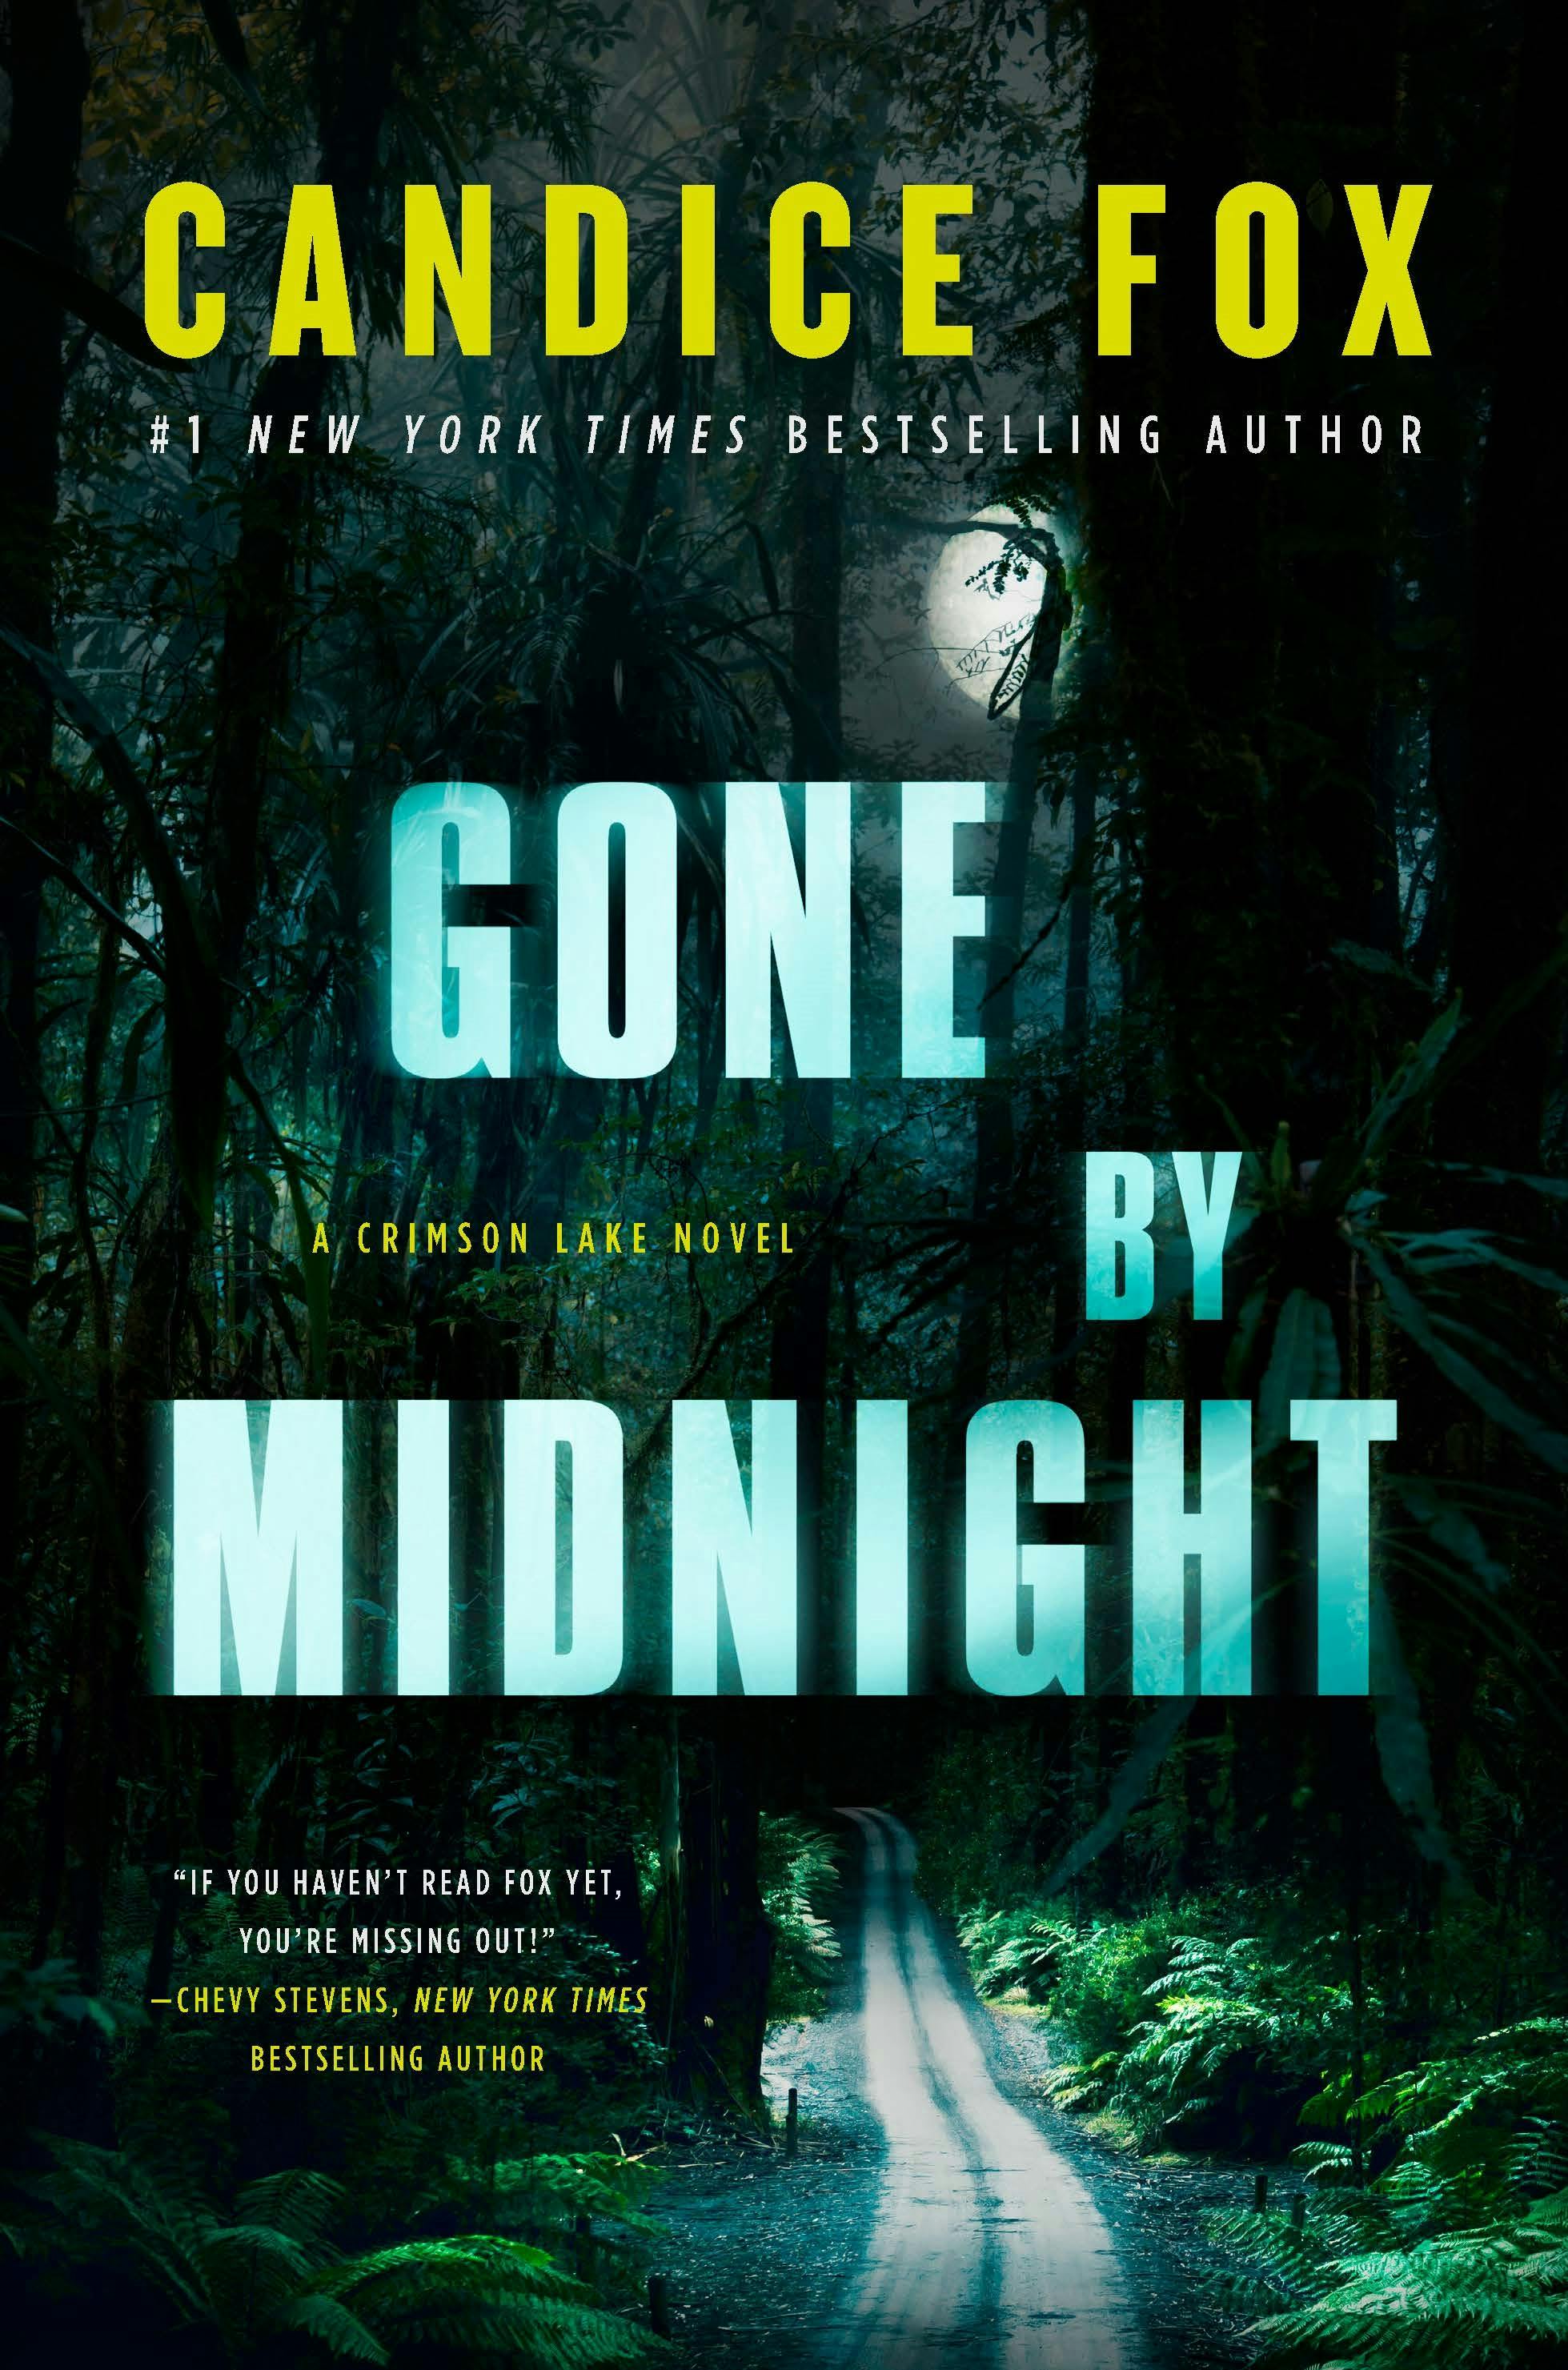 Cover for the book titled as: Gone by Midnight